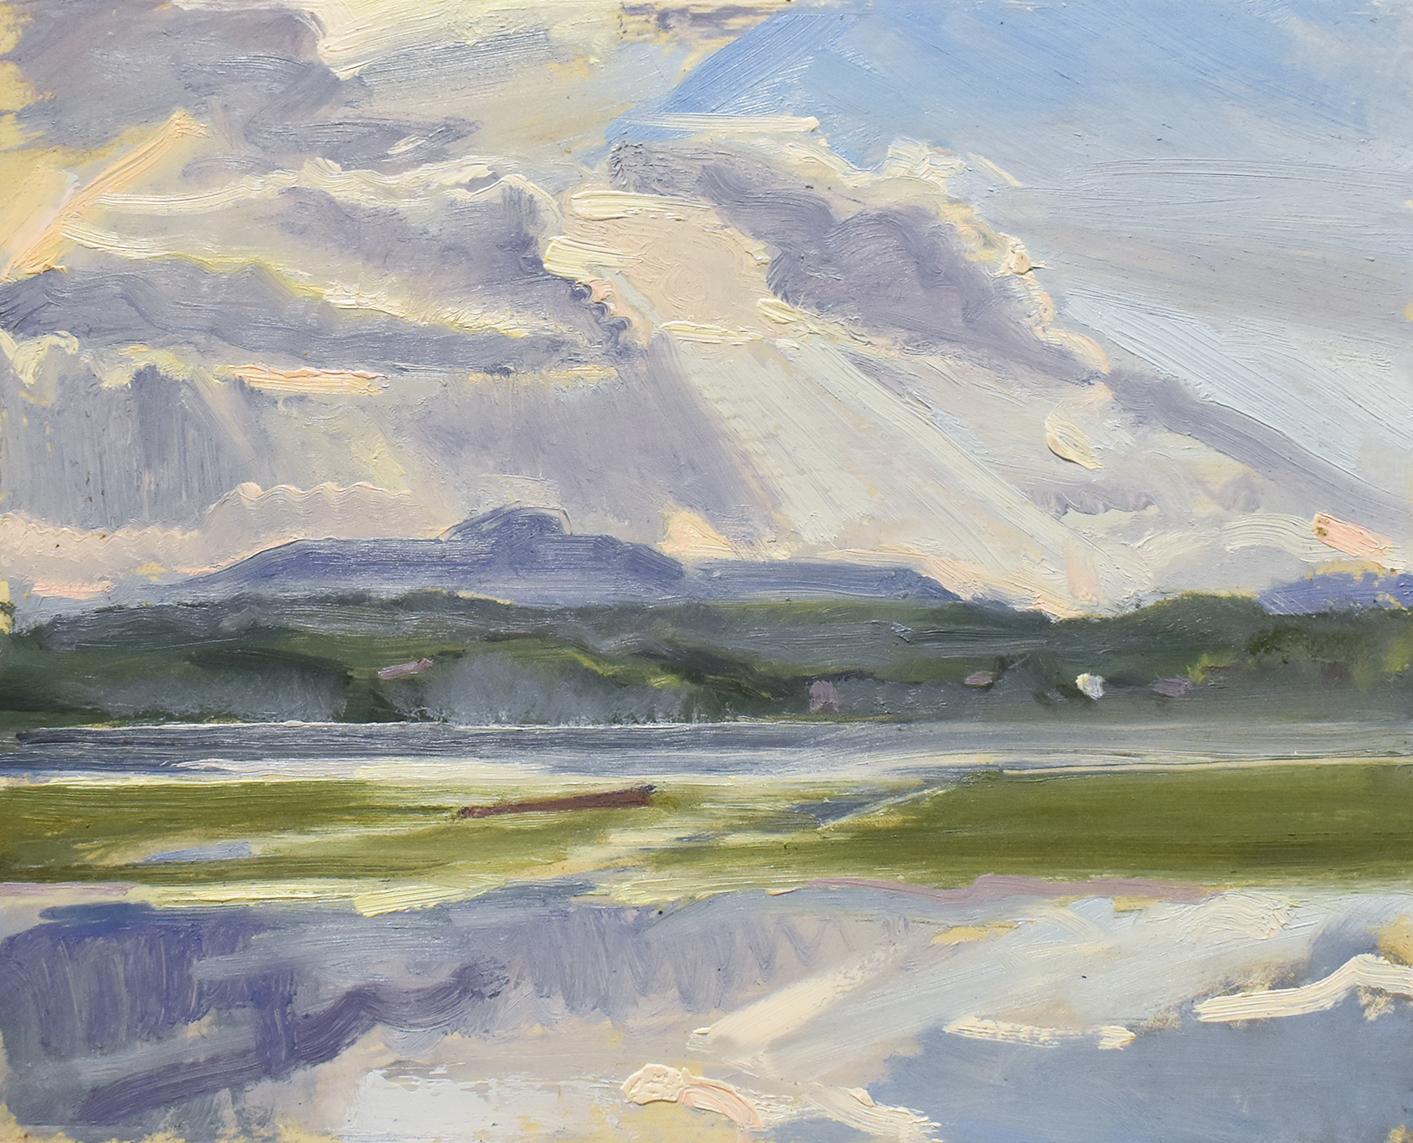 En plein air Hudson Valley landscape painting of the Catskill Mountains and the Hudson River during summertime
Horizontal landscape painting with a blue, green, and soft white palette
Oil on panel, 9.5 x 12 inches in handmade black frame

John Kelly